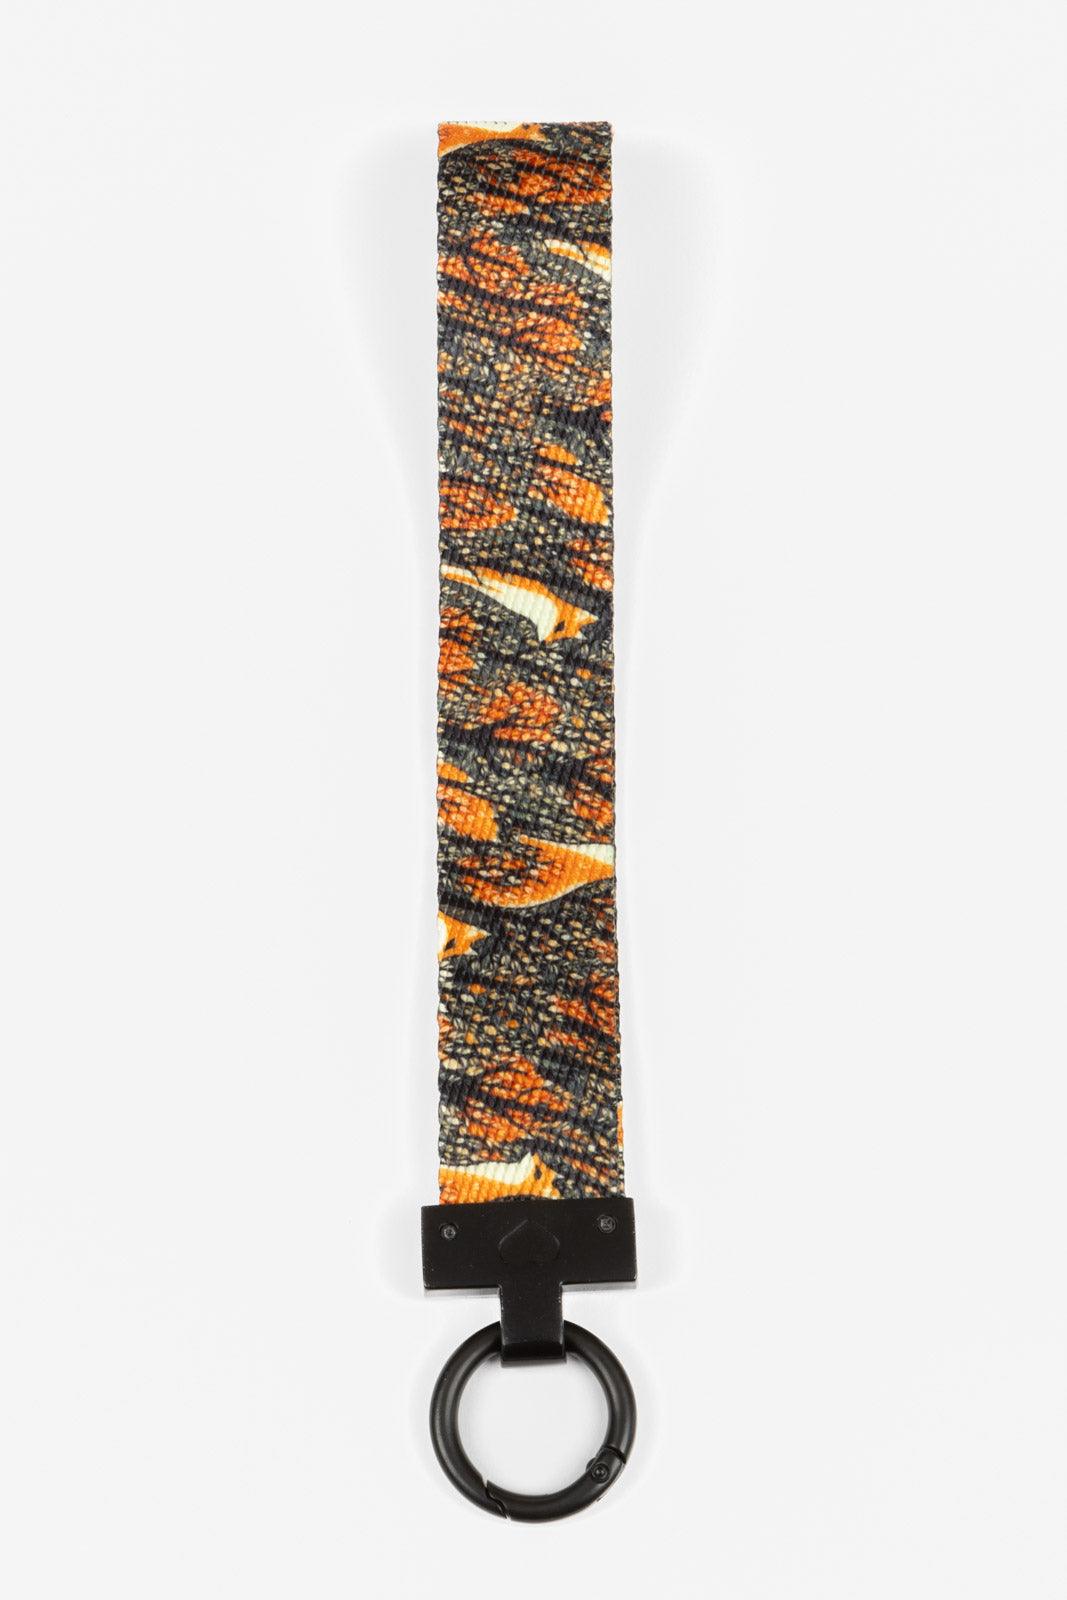 Foxes in Fall Wristlet Keychain - Aria the Fox